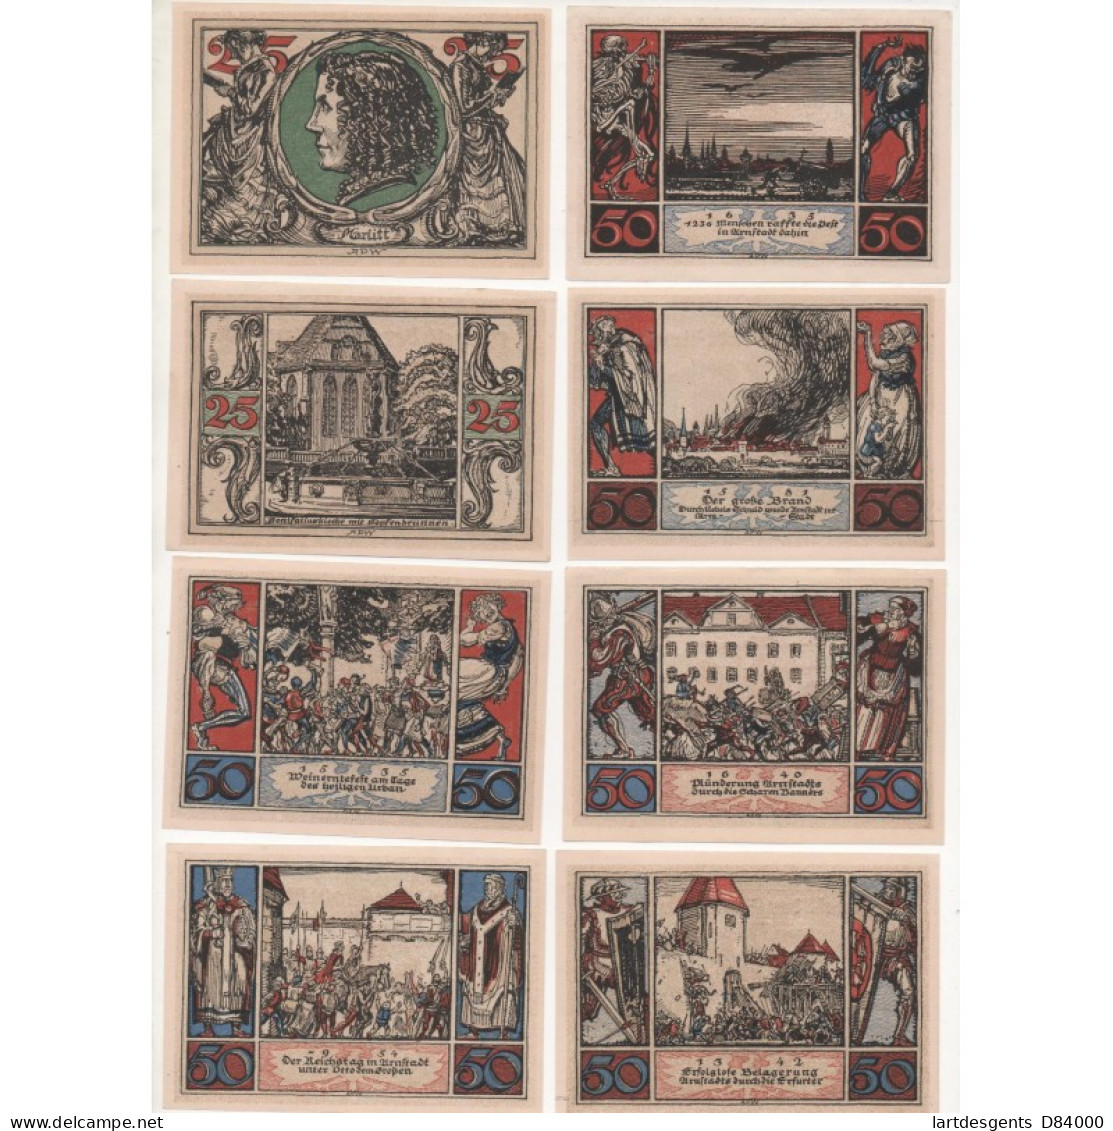 NOTGELD - ARNSTADT - 3 Series Of 6 (18 Different Notes) 10 & 25 & 50 Pfennig - 1921 (A061) - [11] Local Banknote Issues